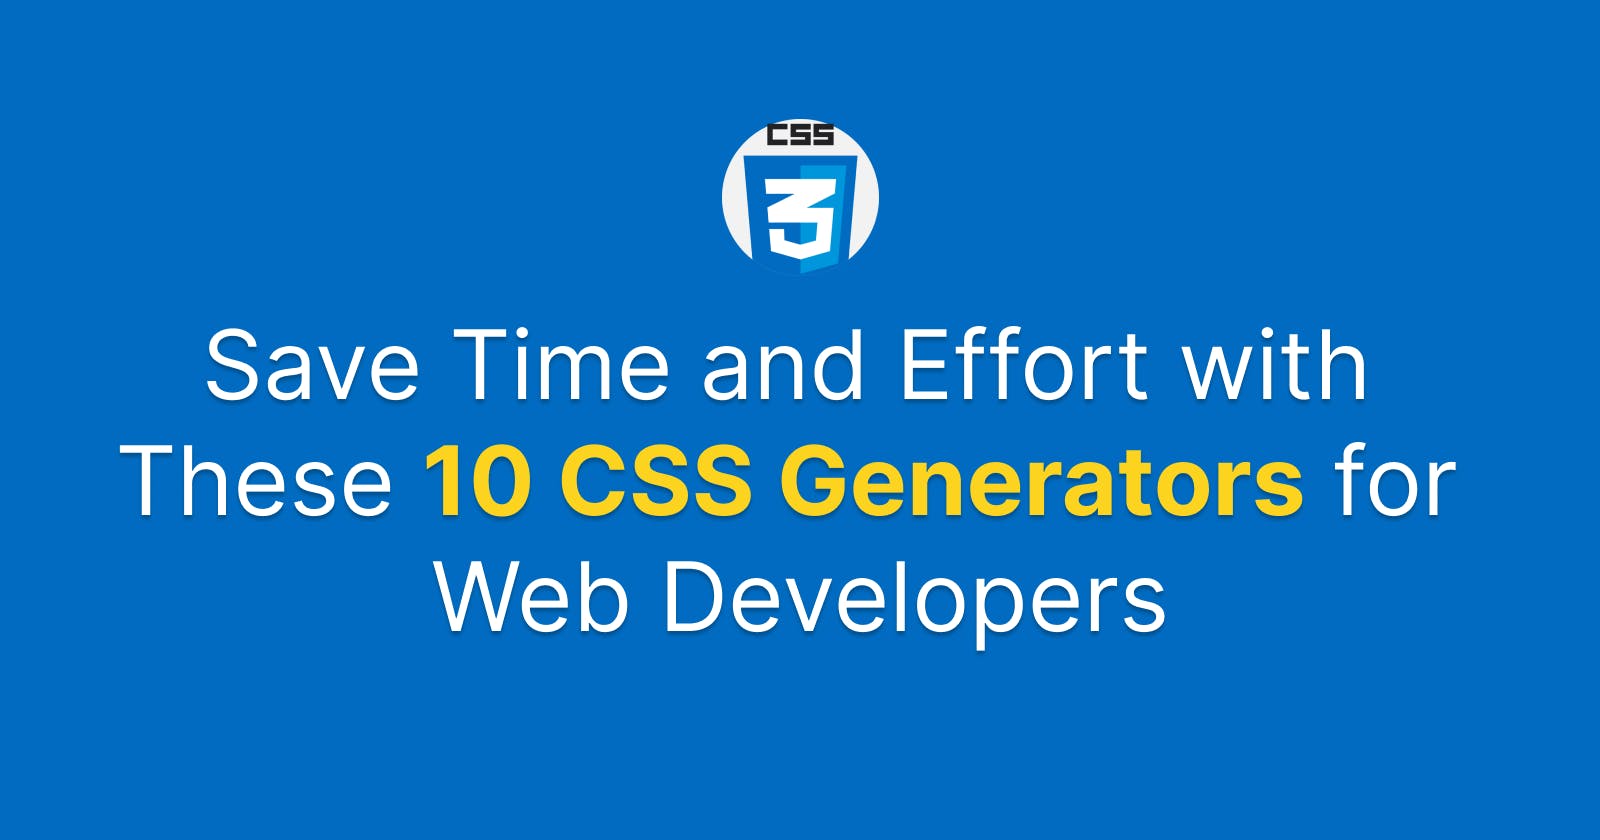 Save Time and Effort with These 10 CSS Generators for Web Developers